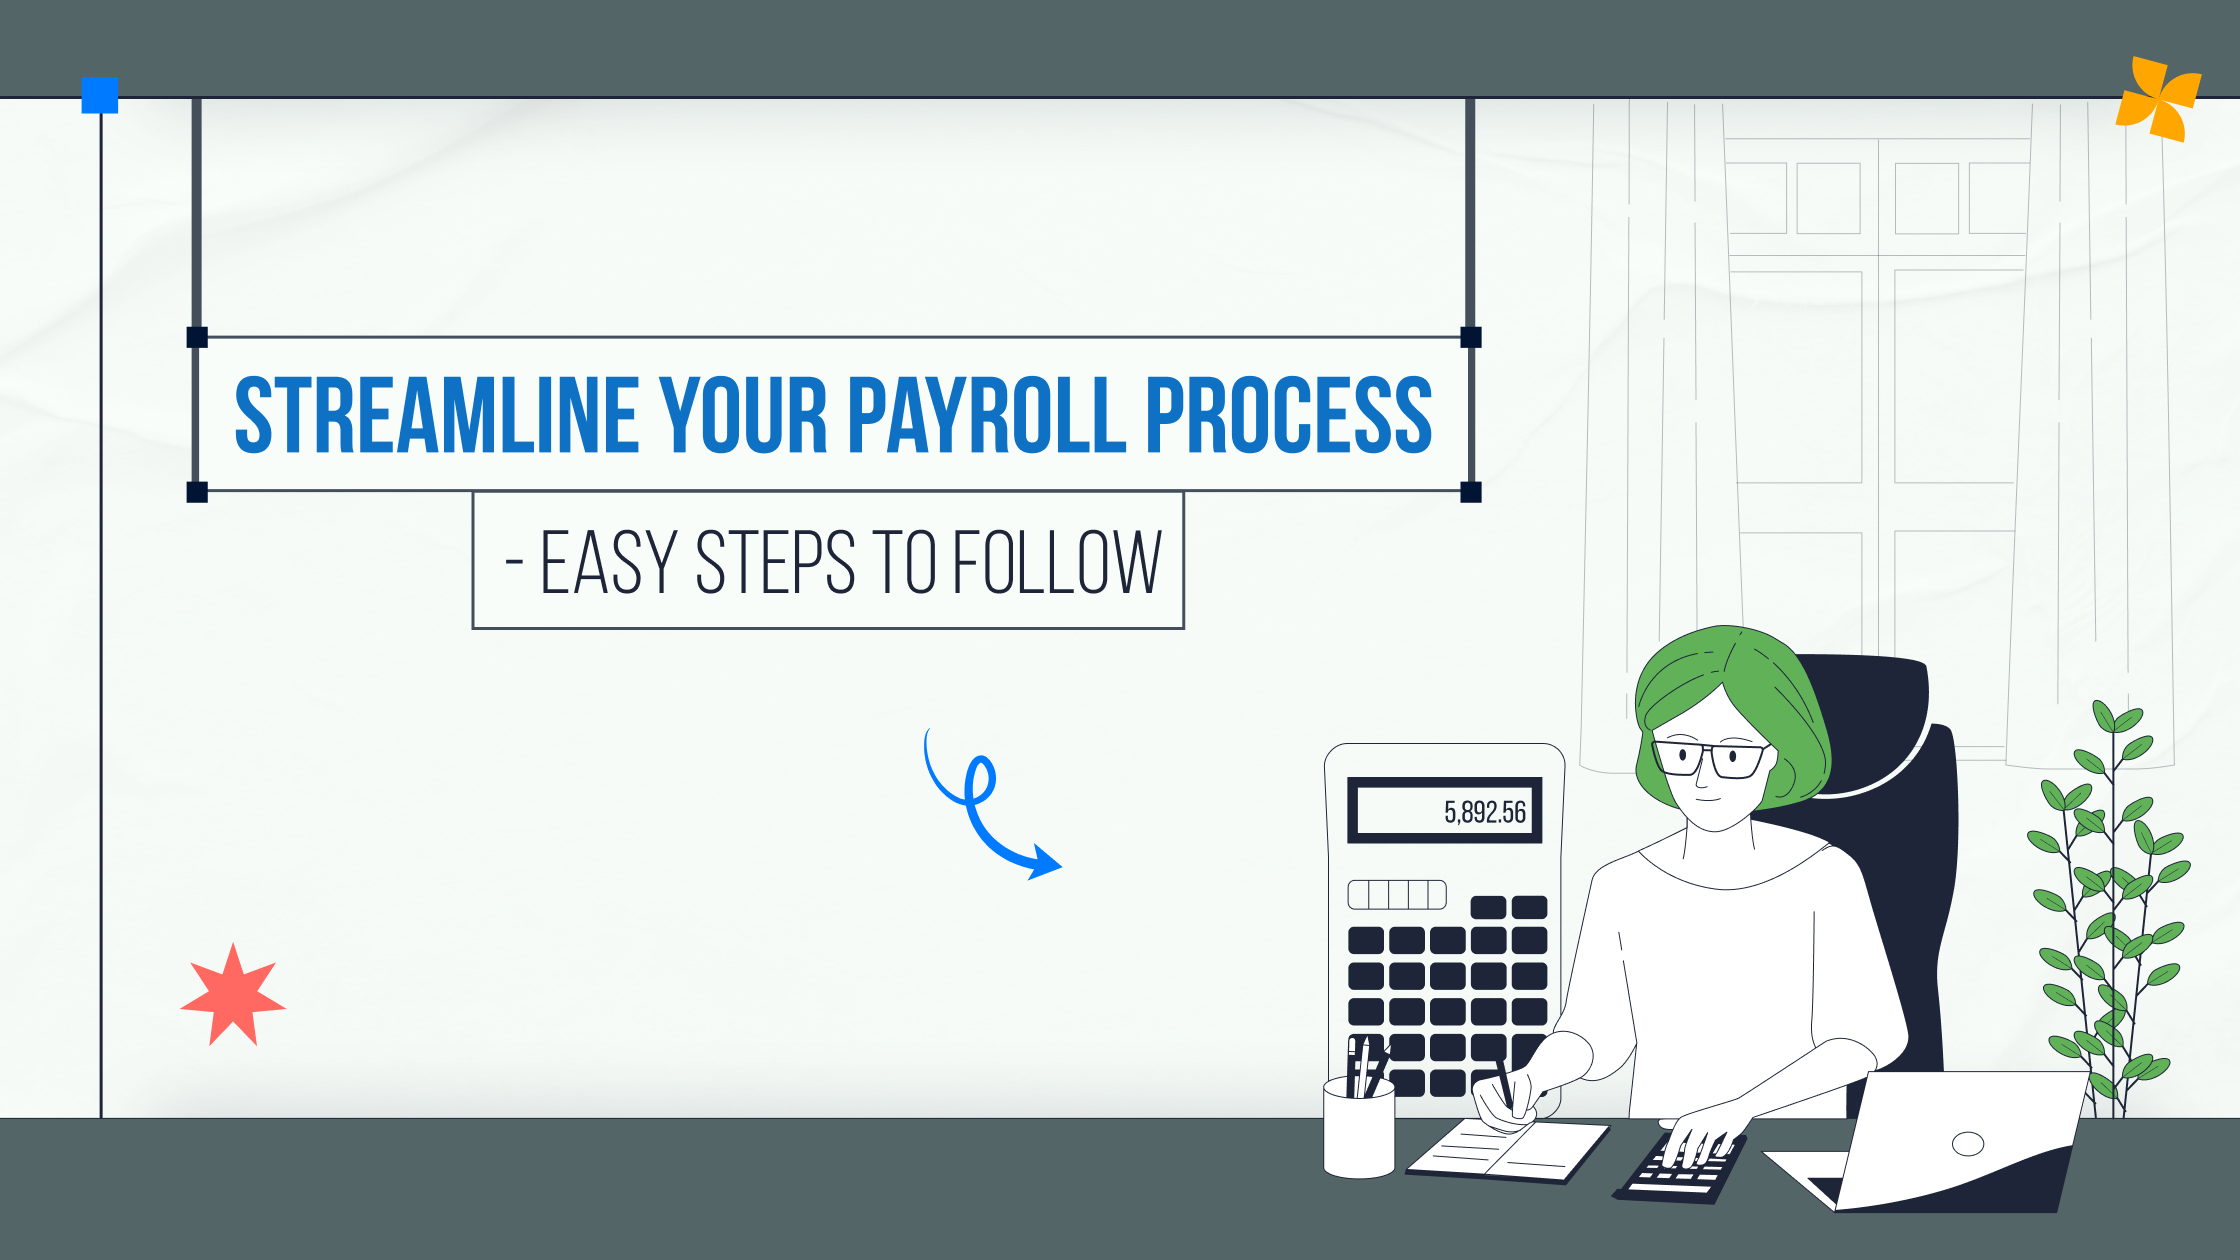 Streamline Your Payroll Process Easy Steps to Follow